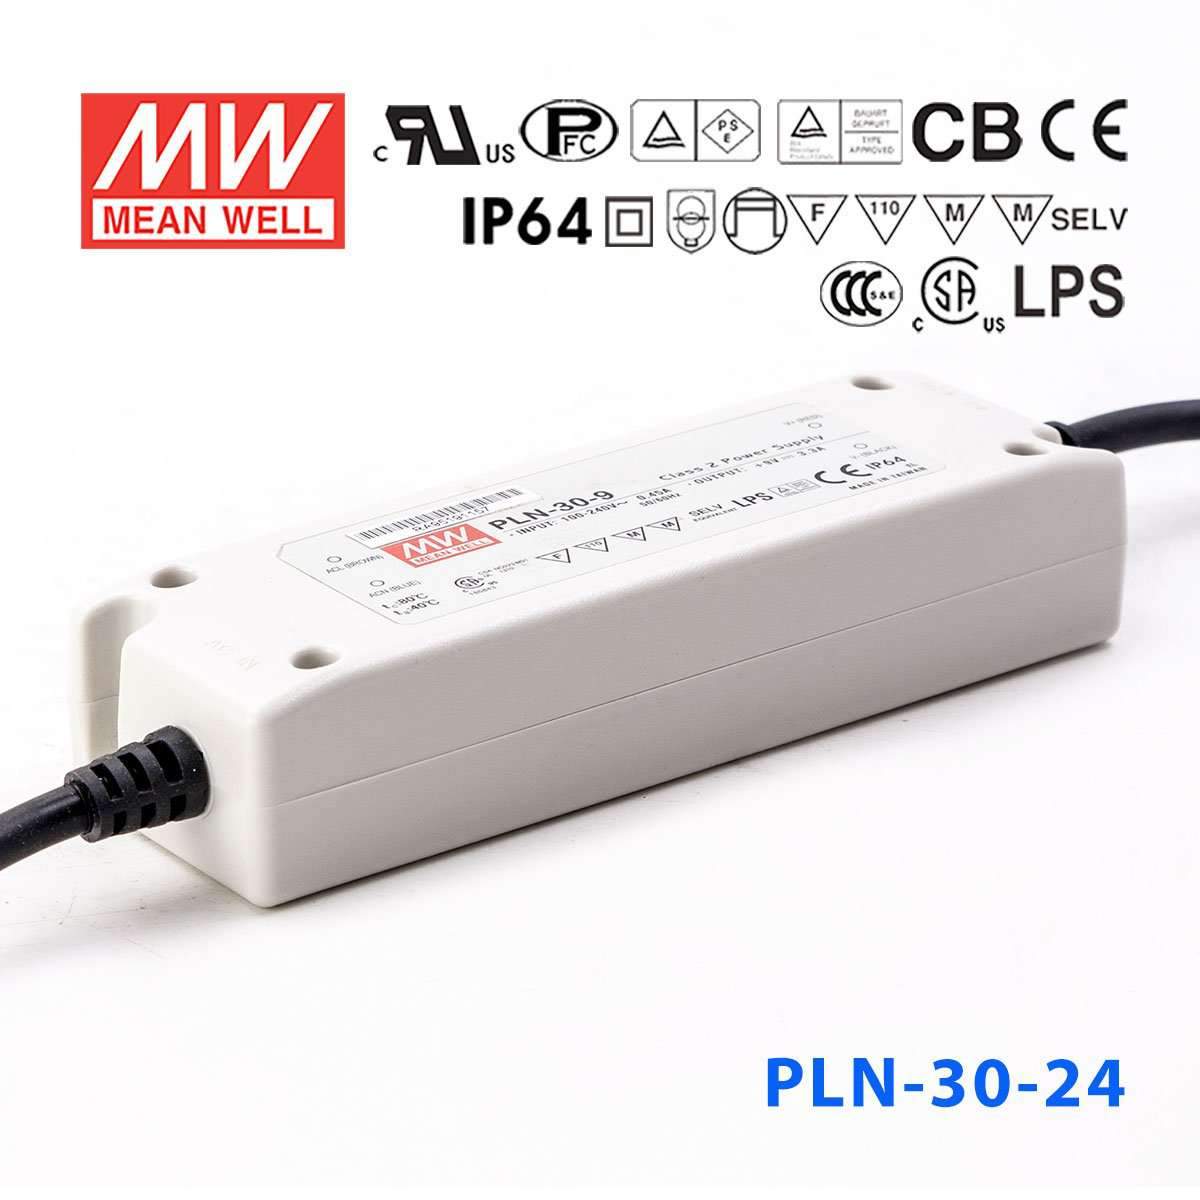 Mean Well PLN-30-24 Power Supply 30W 24V - IP64